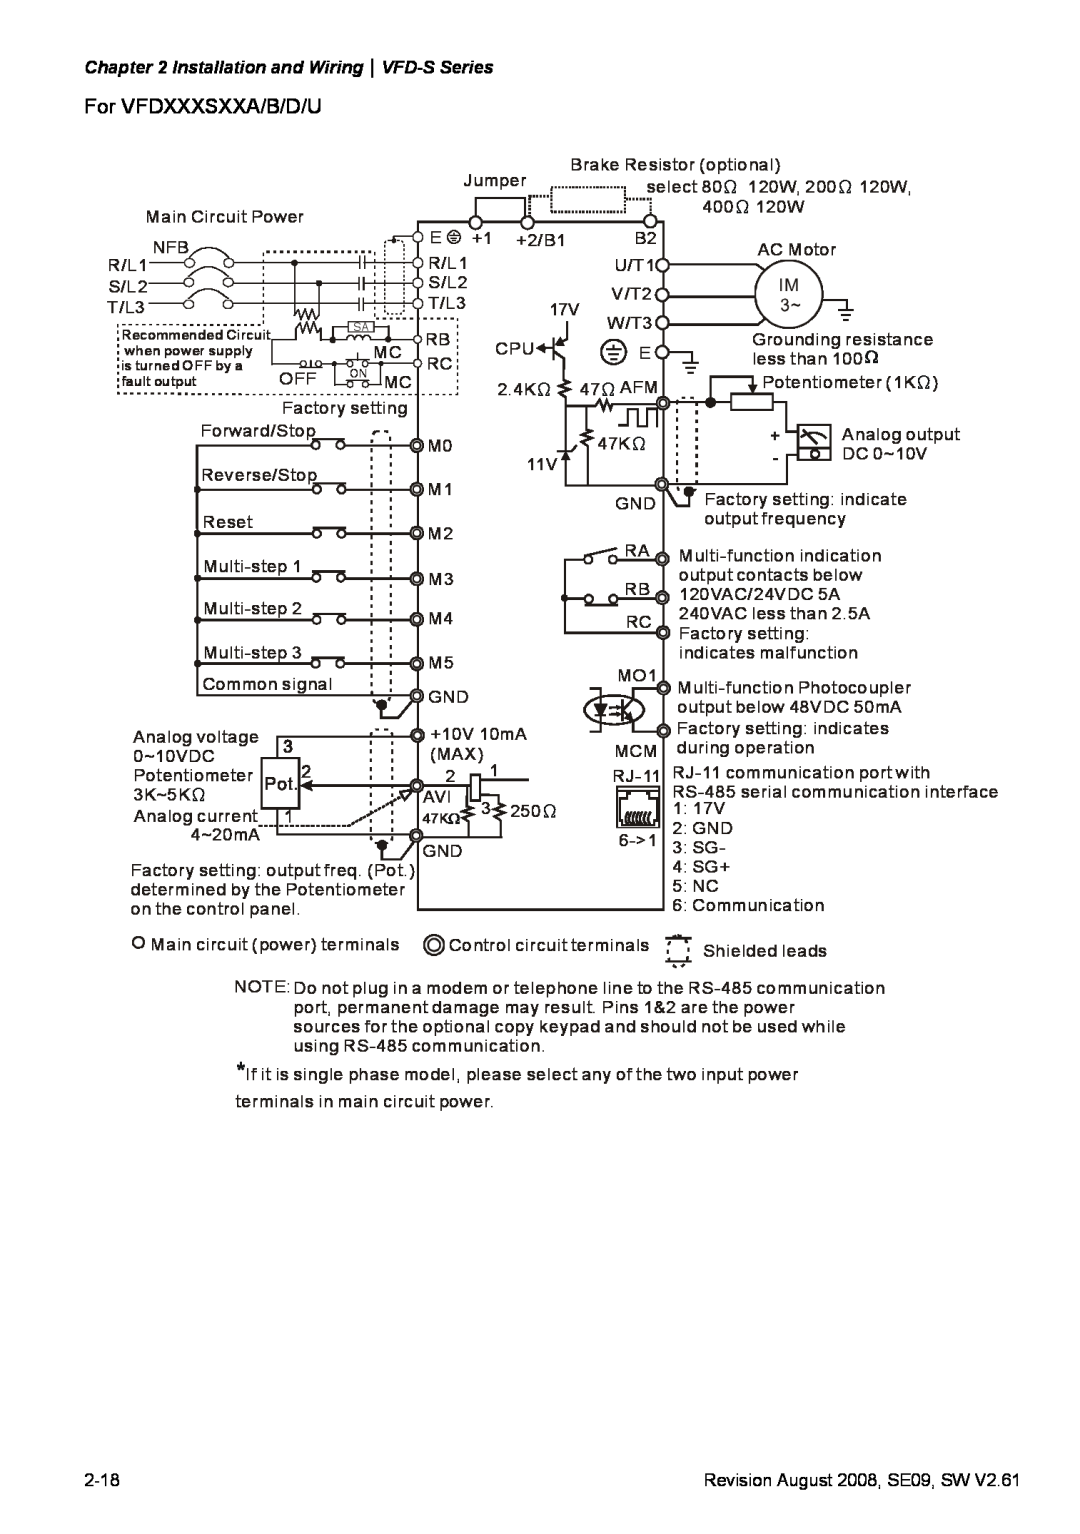 Delta Electronics For VFDXXXSXXA/B/D/U, Installation and WiringVFD-S Series, Recommended Circuit, when power supply 